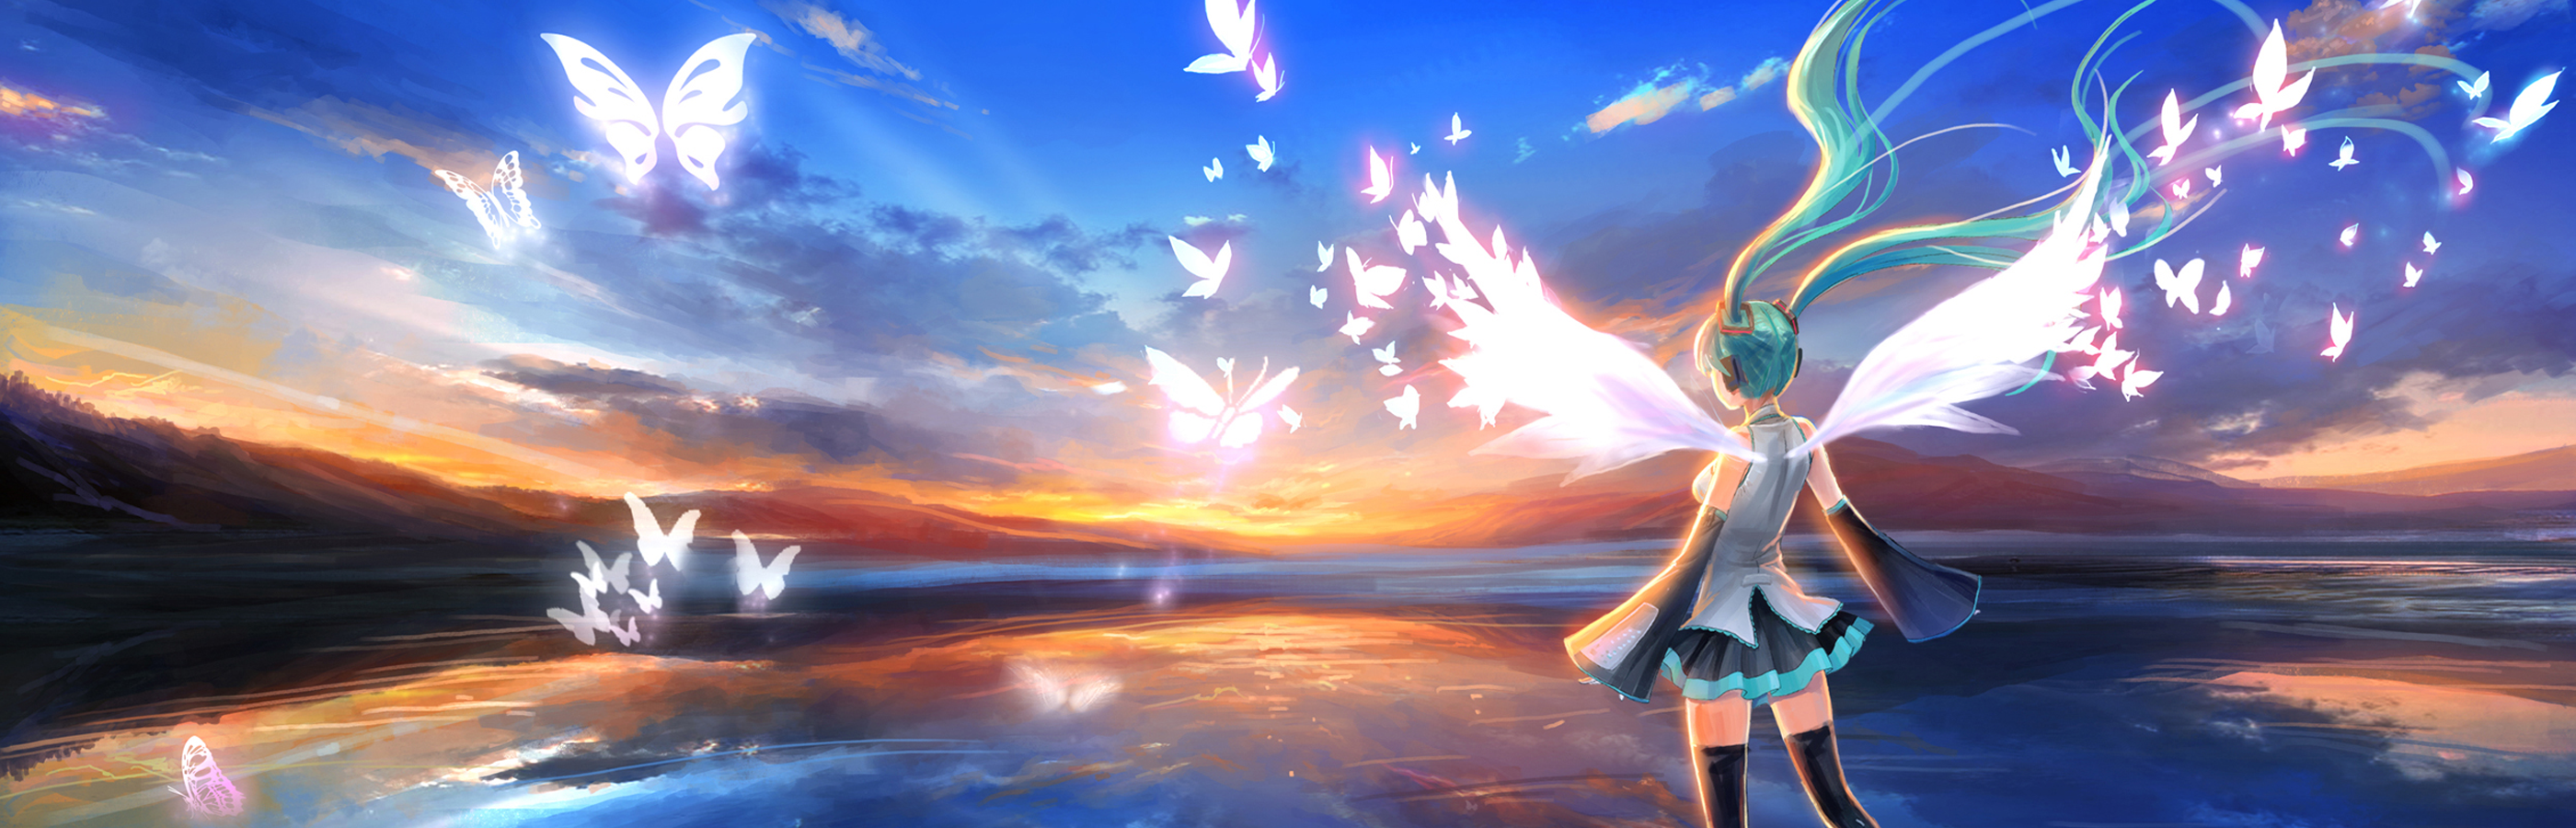 anime wallpapers and backgrounds,sky,cg artwork,anime,calm,fictional character